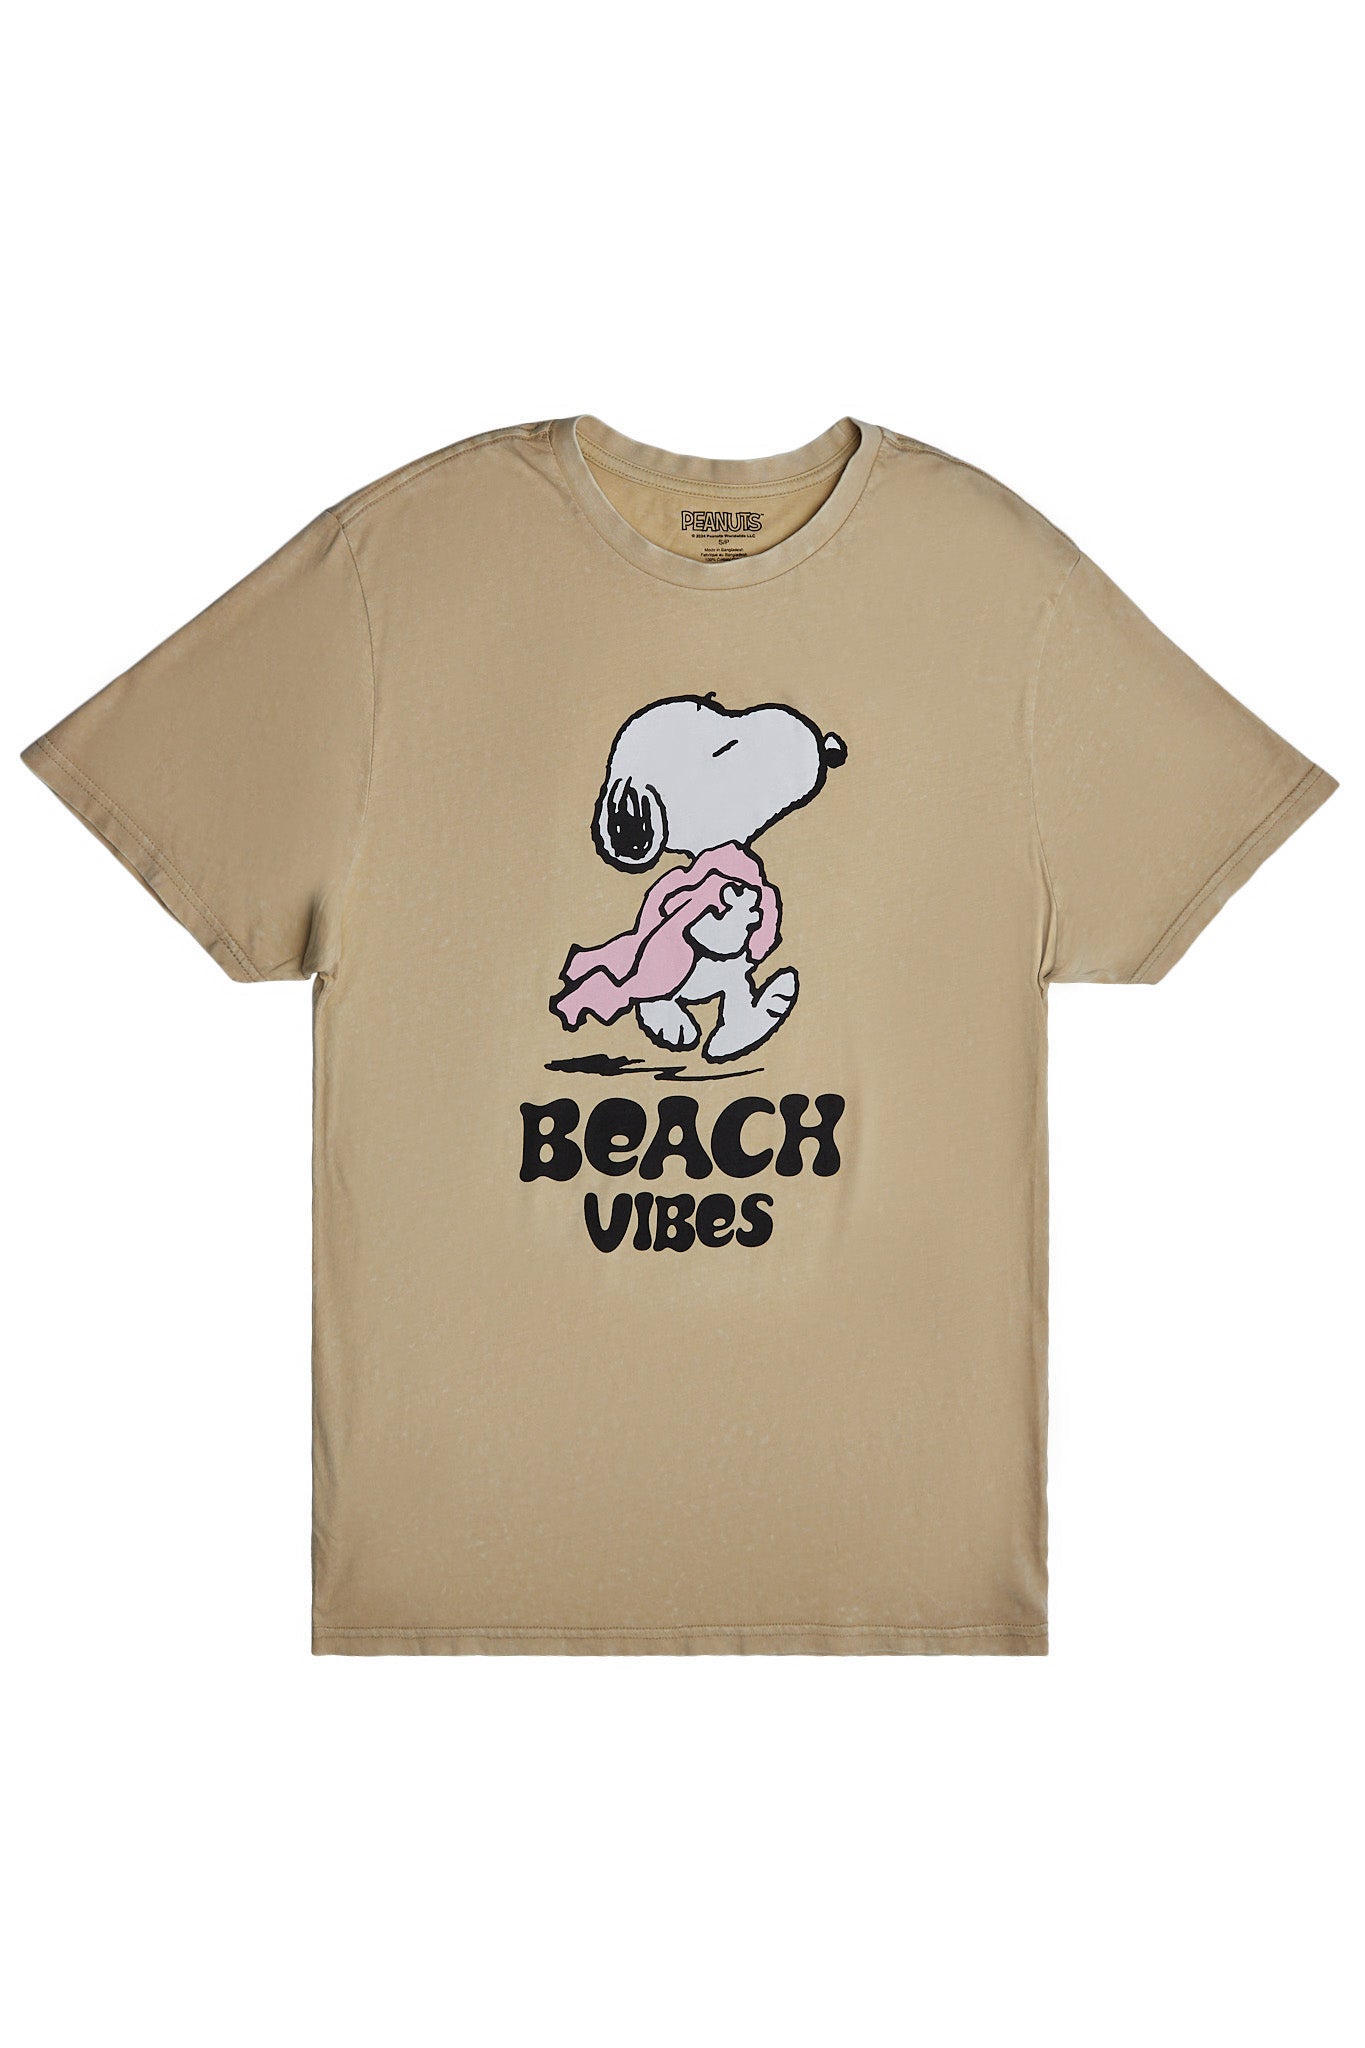 Peanuts Snoopy Beach Vibes Graphic Tee